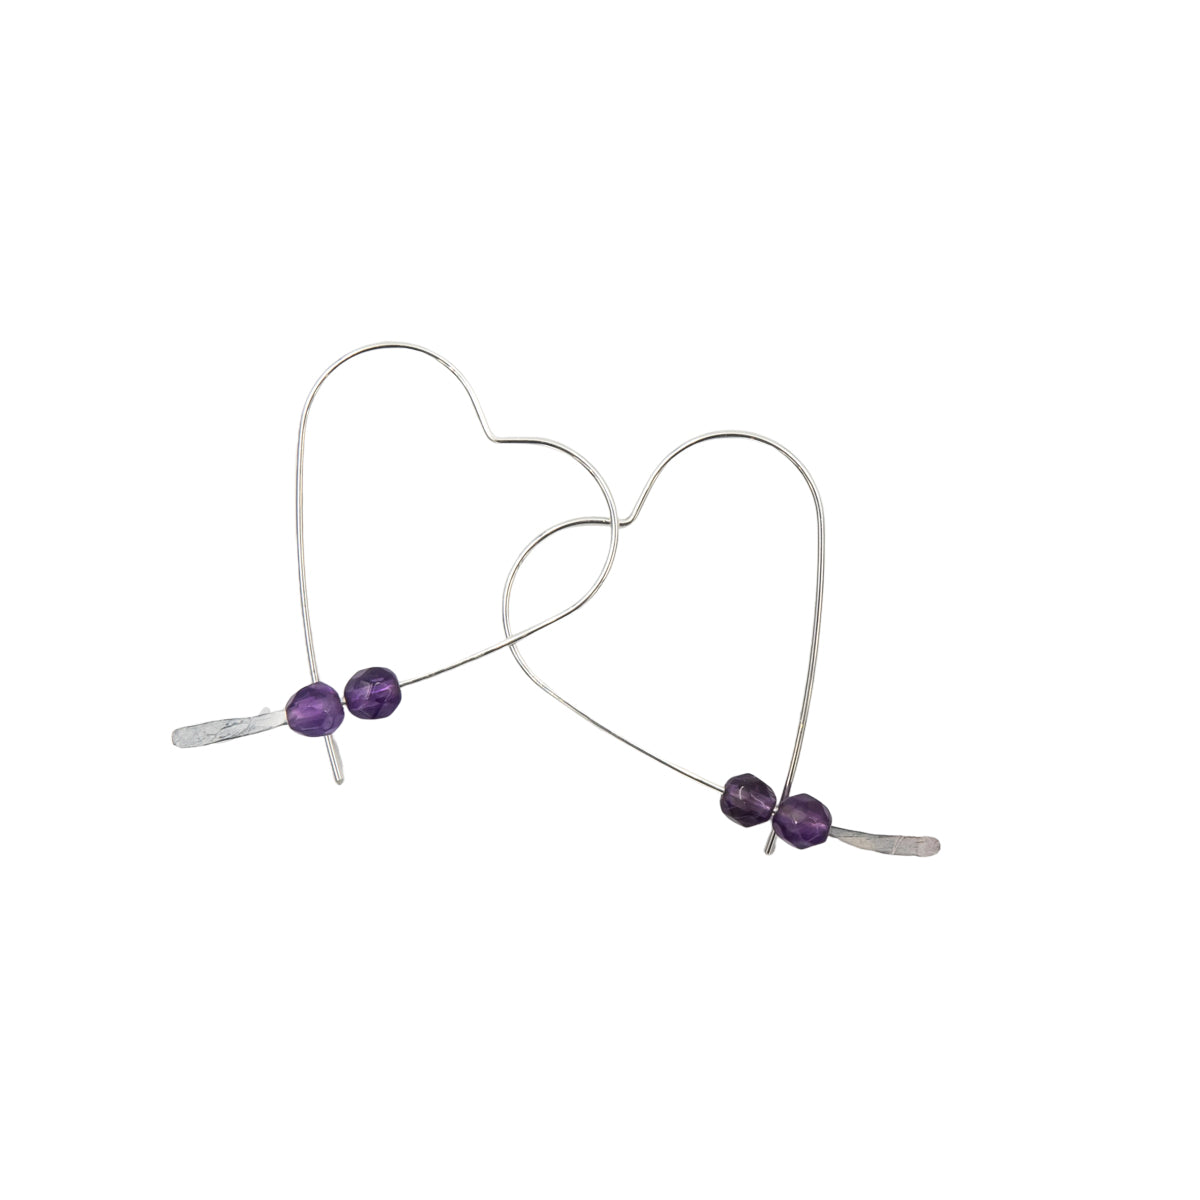 Earth Song Jewelry Handmade Sterling Silver Heart Earrings with faceted Amethyst stones